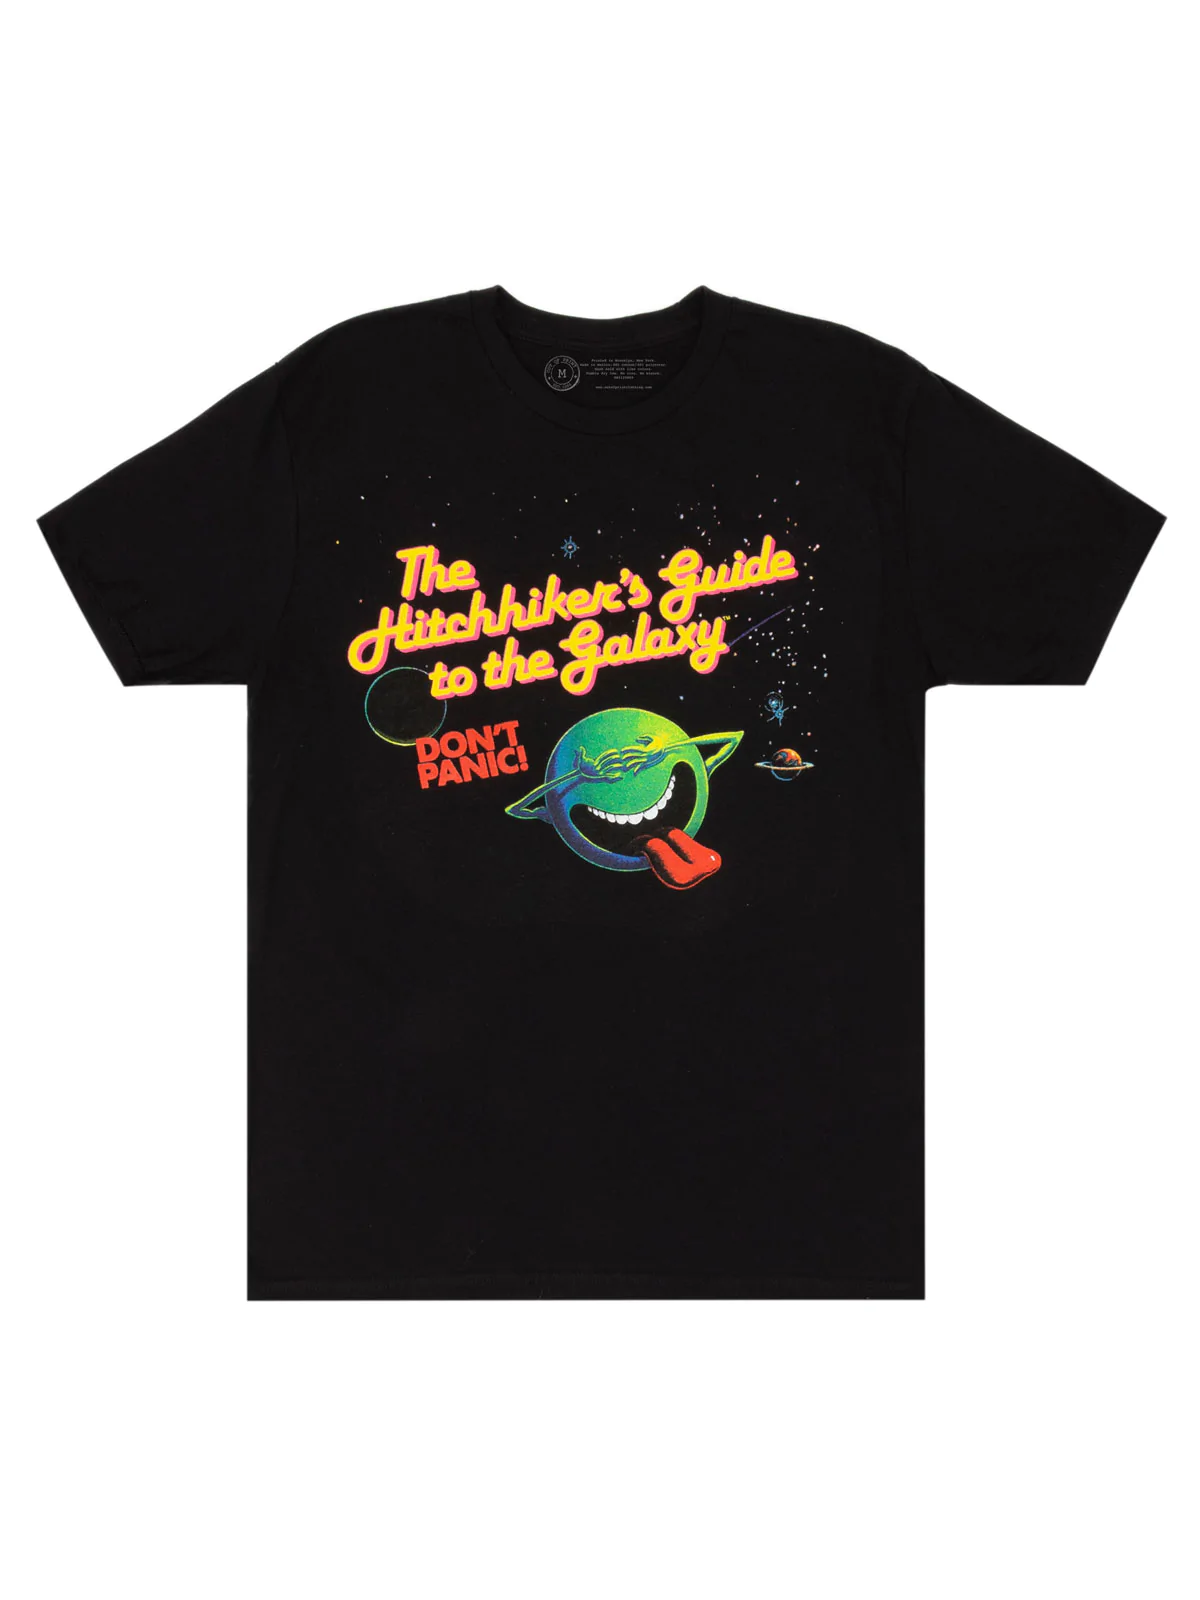 The Hitchhiker's Guide to the Galaxy T-Shirt